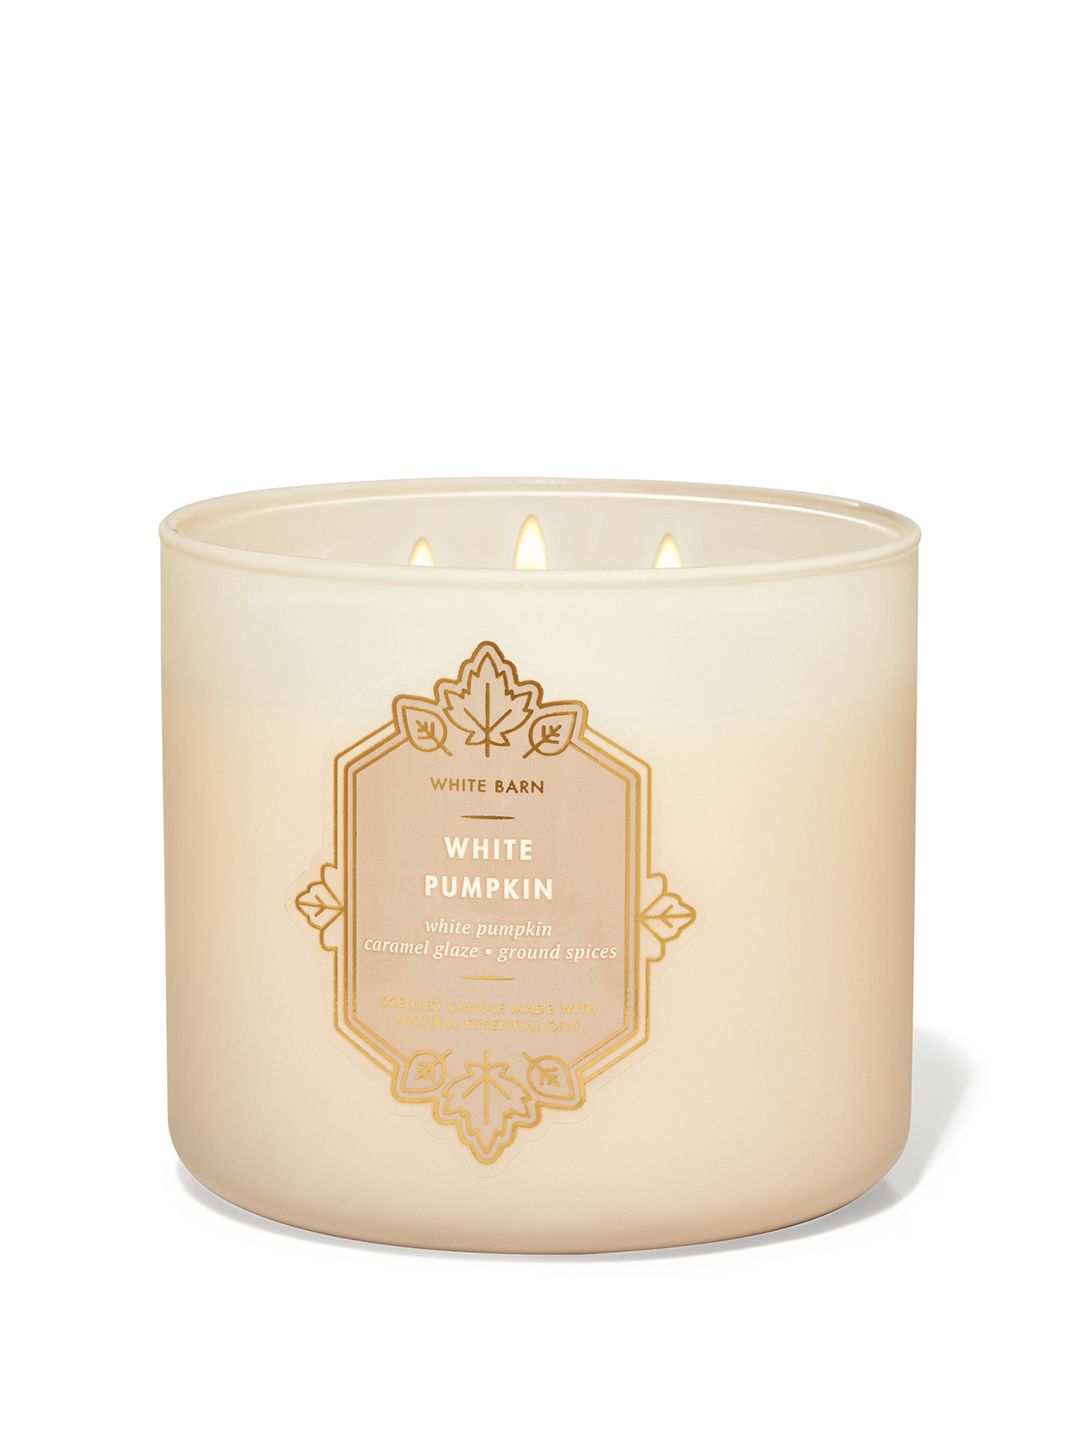 Bath & Body Works White Pumpkin 3-Wick Scented Candle with Essential Oils - 411g Price in India